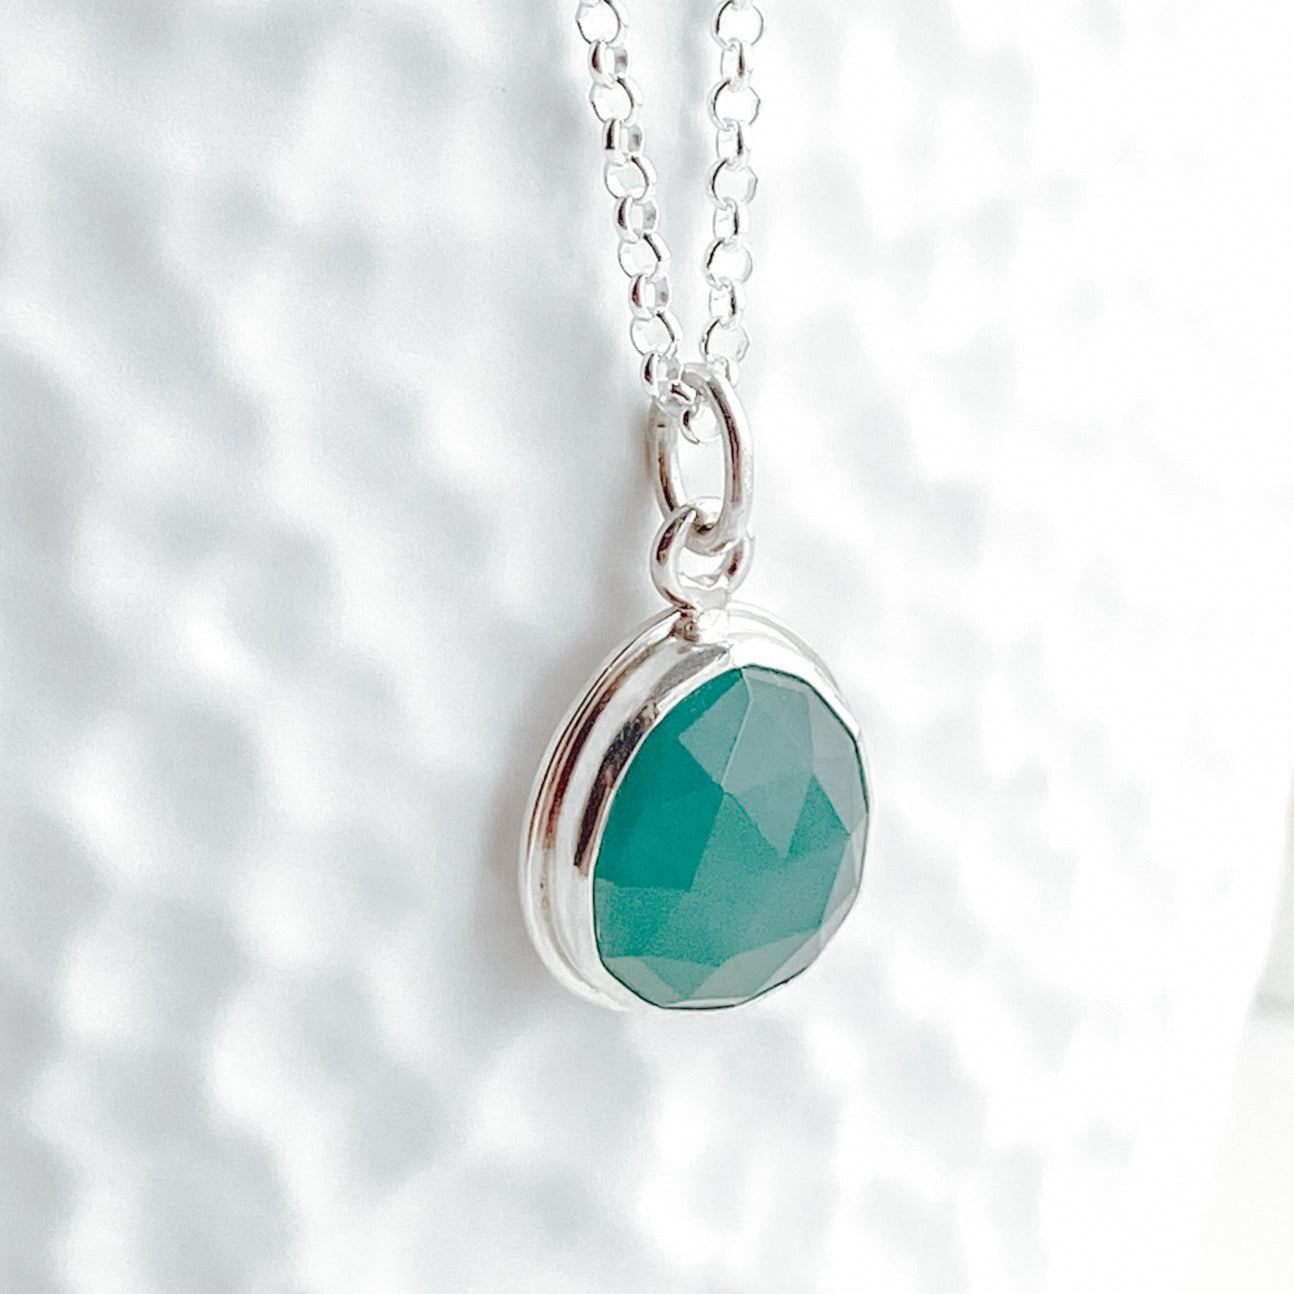 Close up view of a teal green gandiderite gemstone and silver pendant on a white textured background.